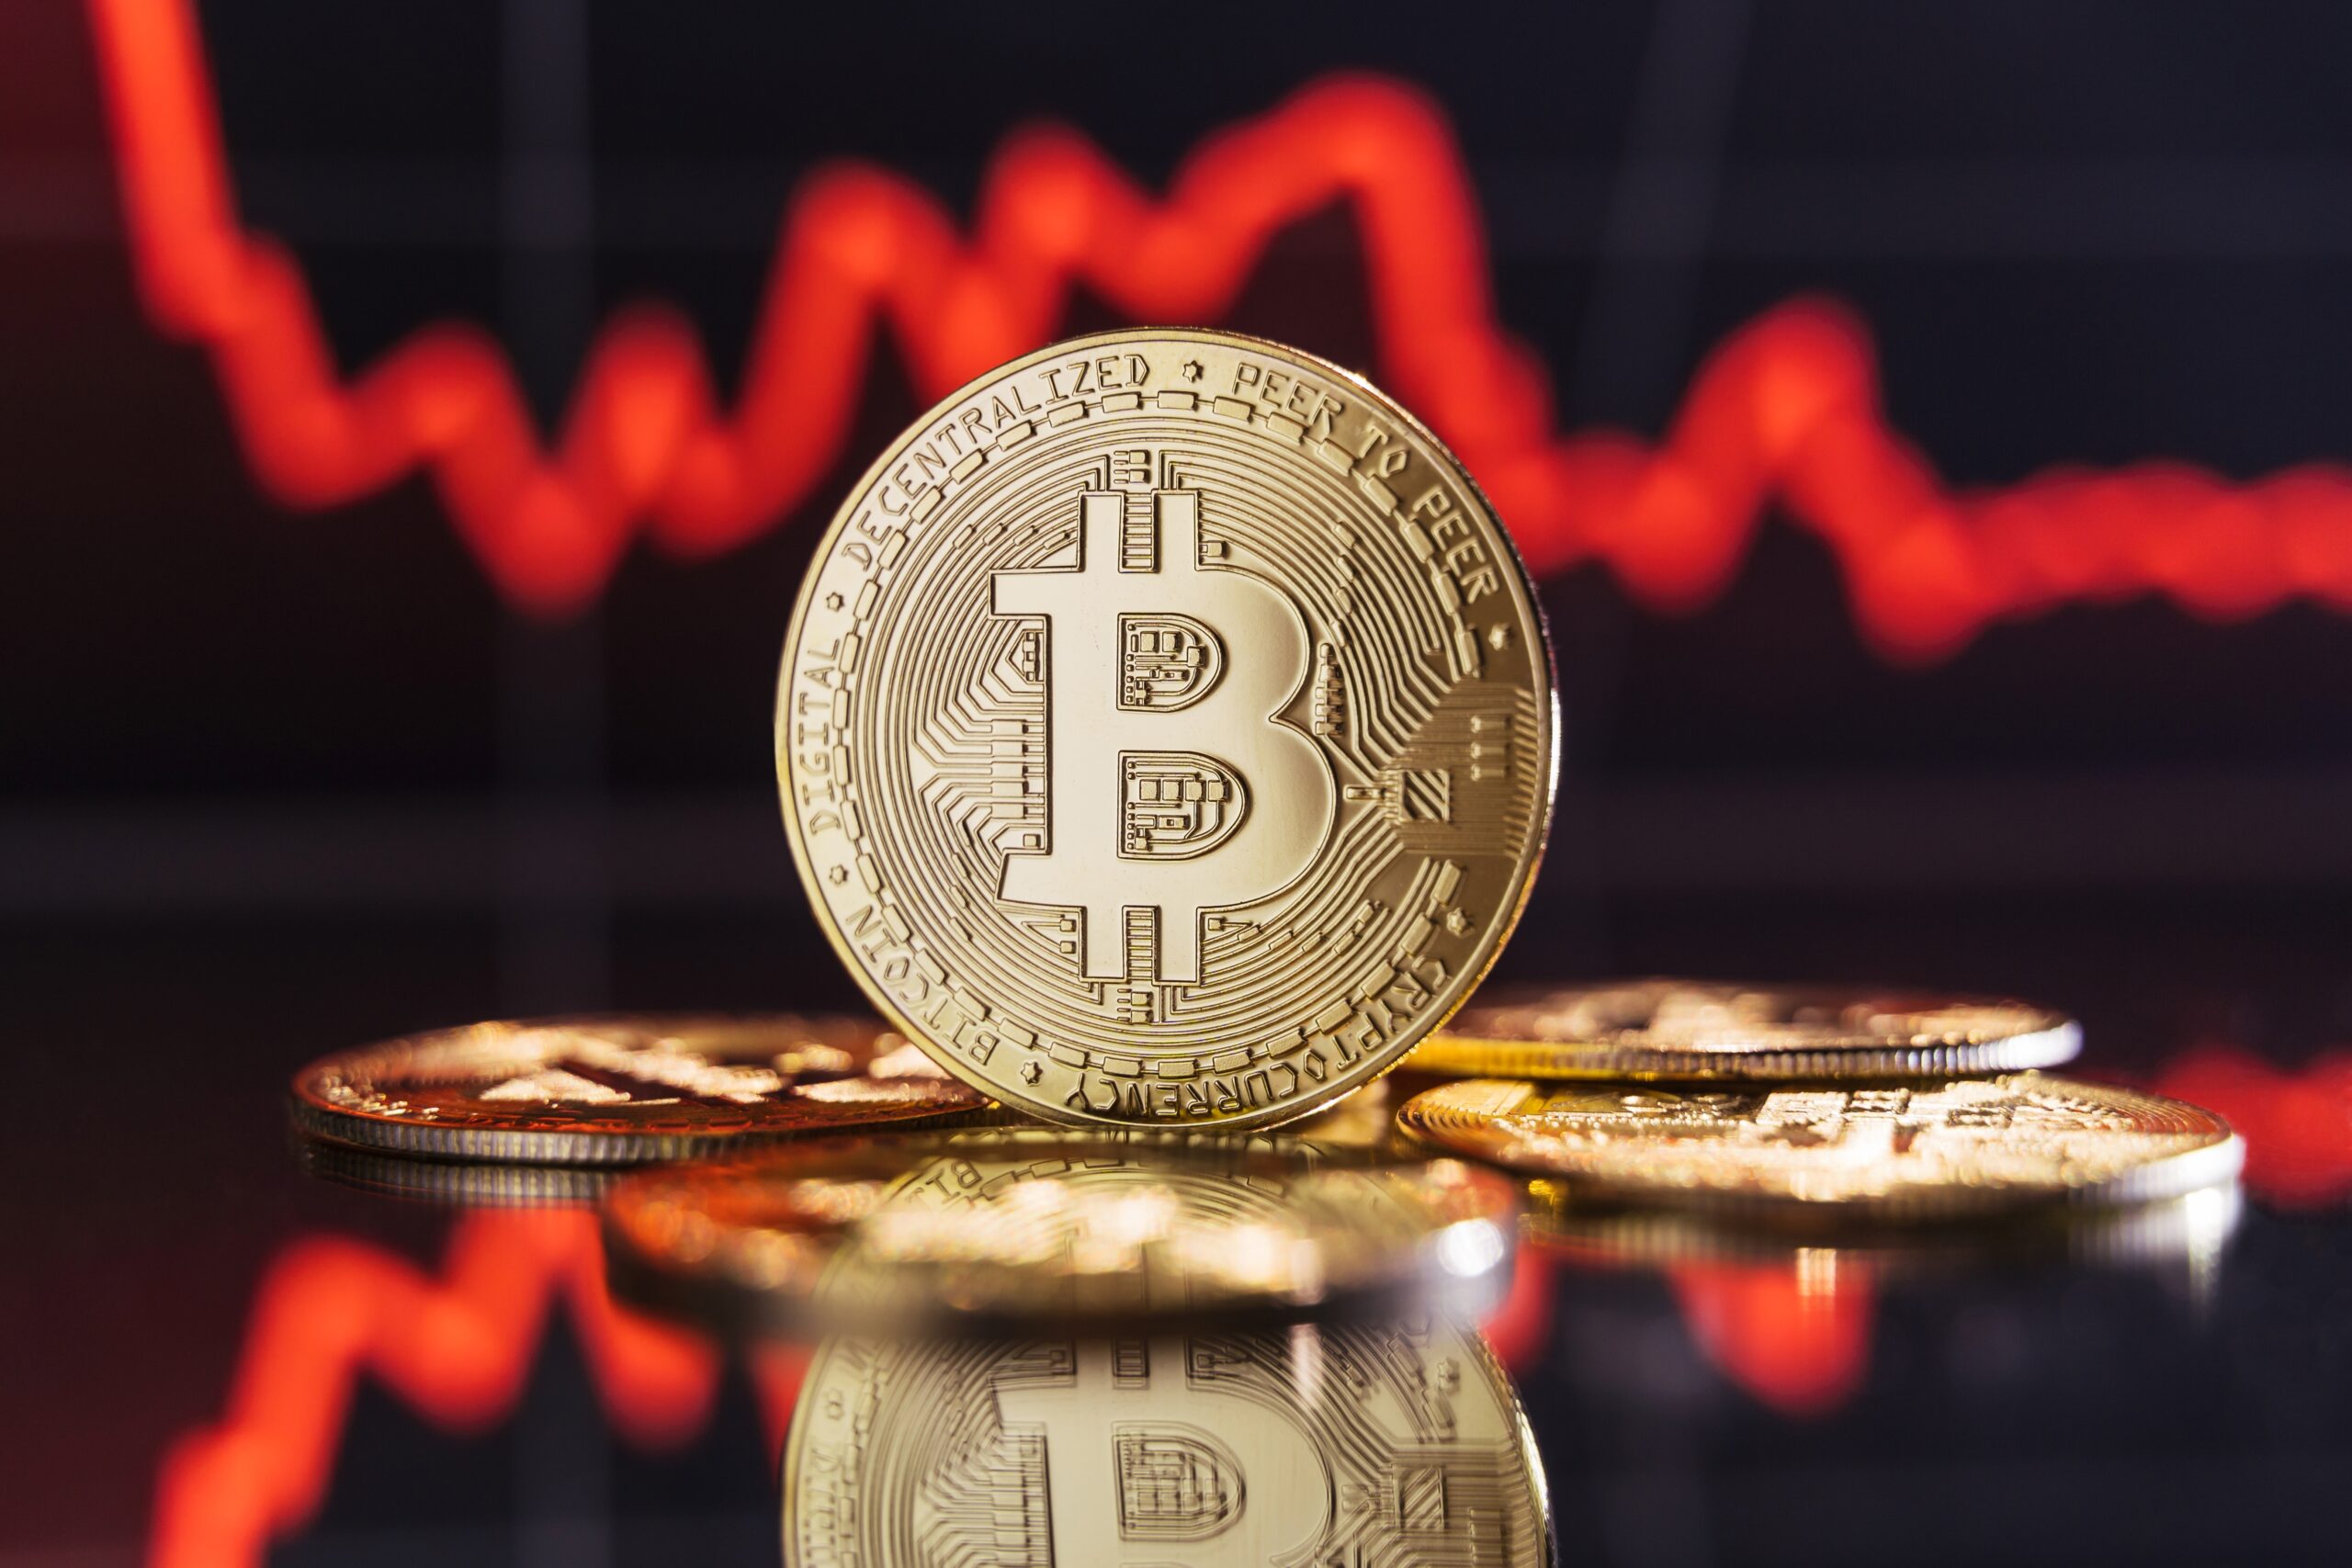 Bitcoin Rises as Tech Earnings Disappoint and ETFs Attract Inflows